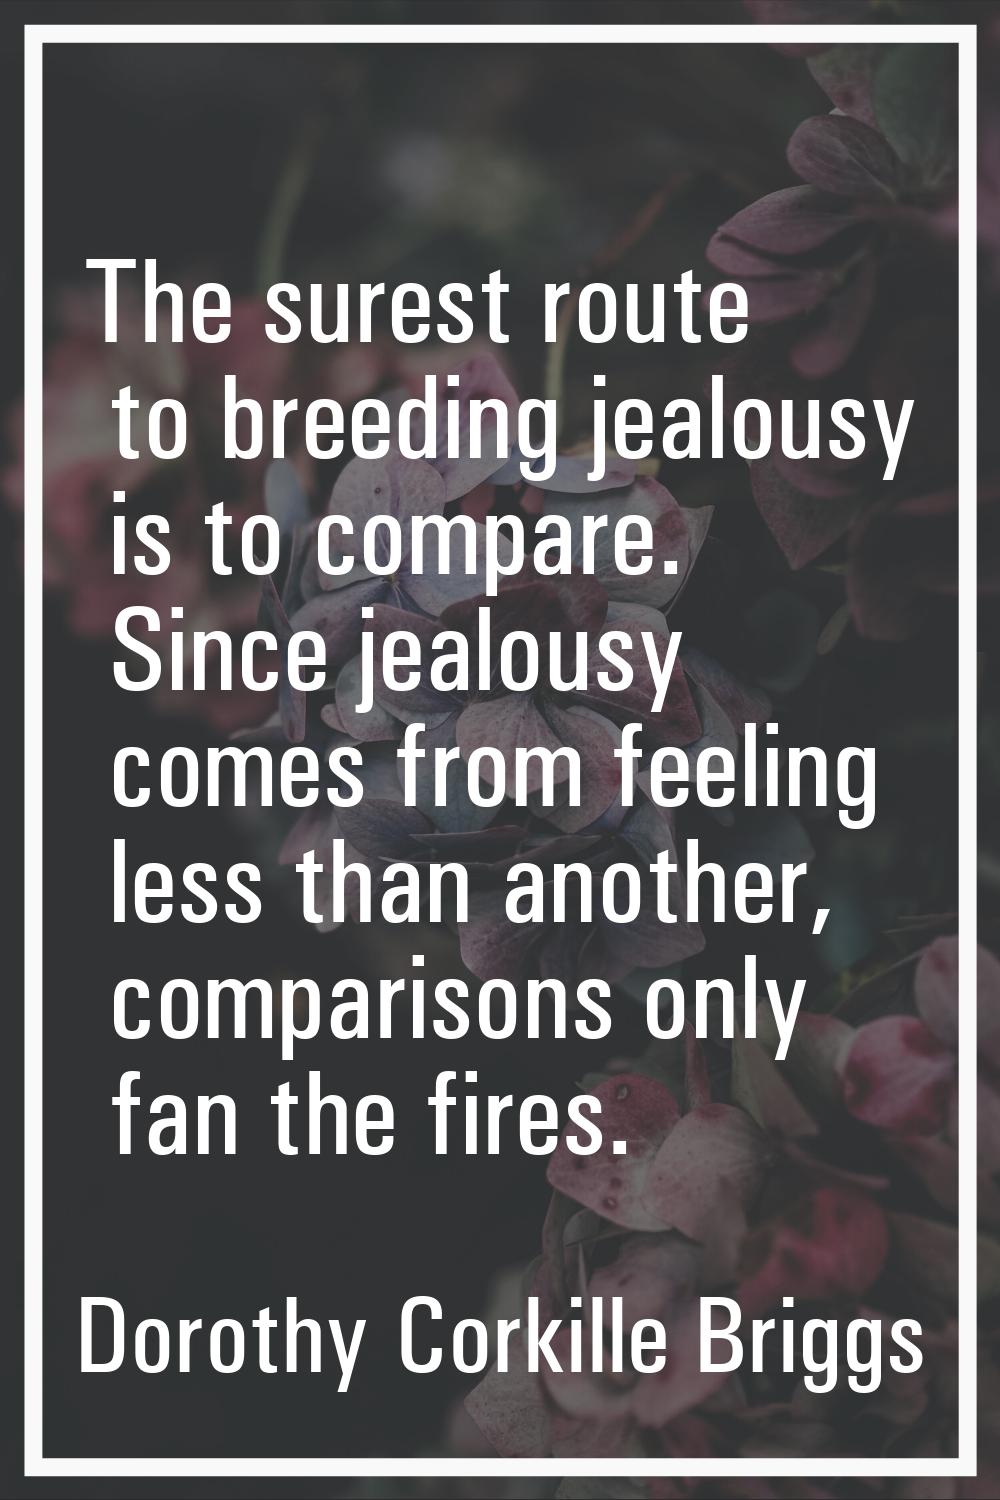 The surest route to breeding jealousy is to compare. Since jealousy comes from feeling less than an